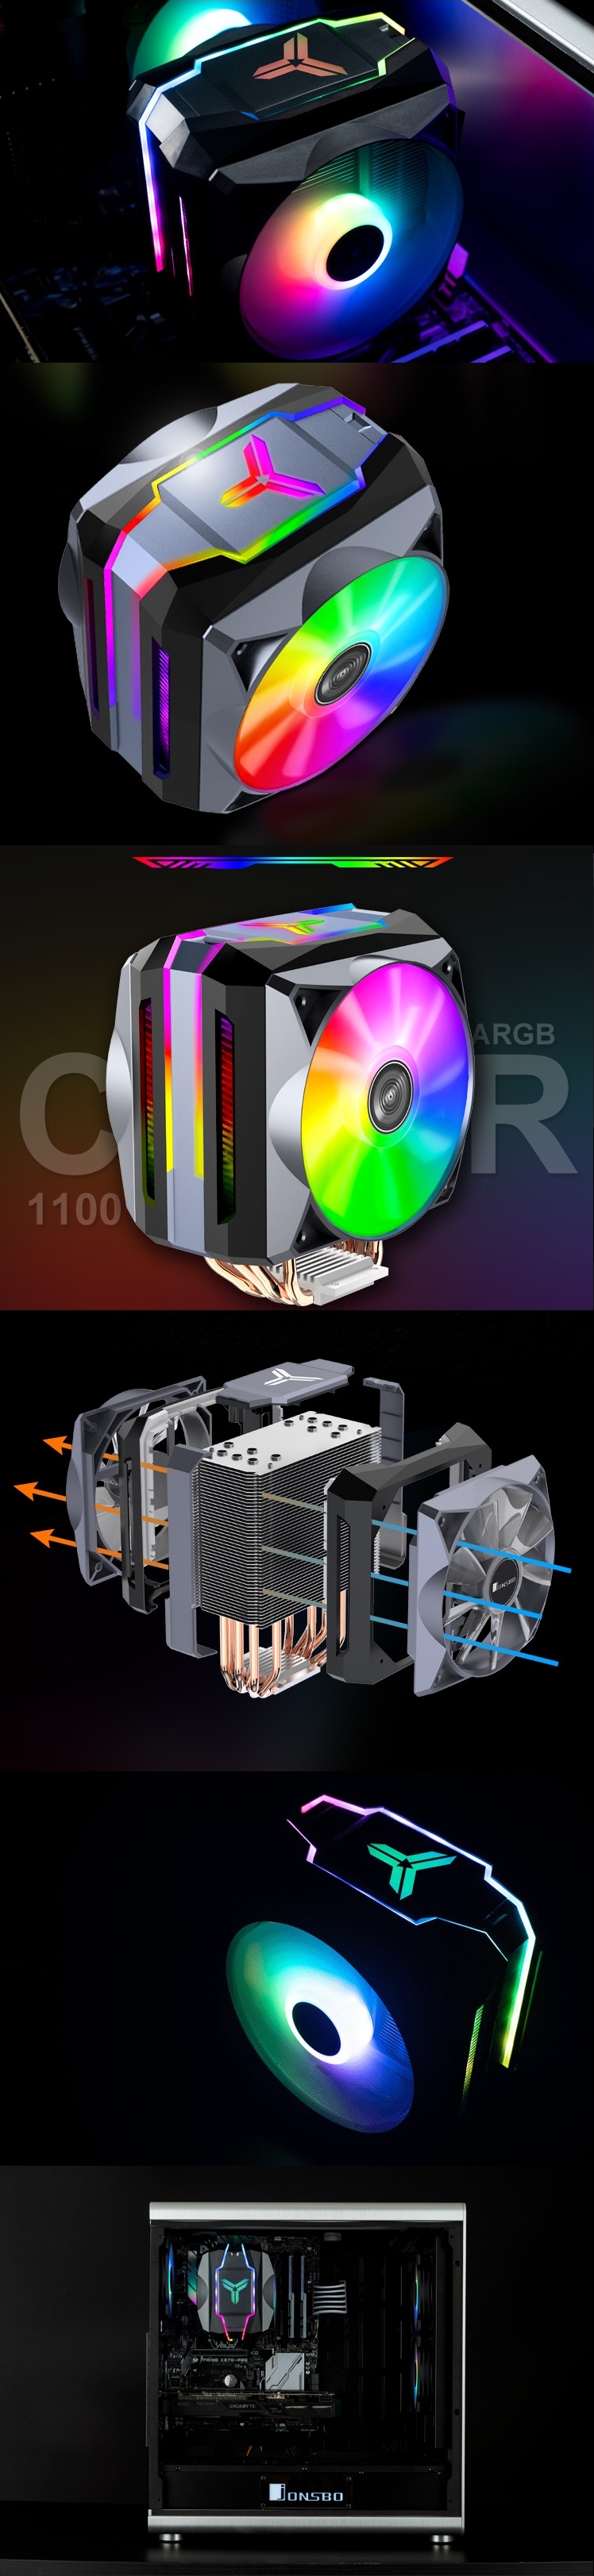 A large marketing image providing additional information about the product Jonsbo CR-1100 Grey ARGB LED CPU Cooler - Additional alt info not provided